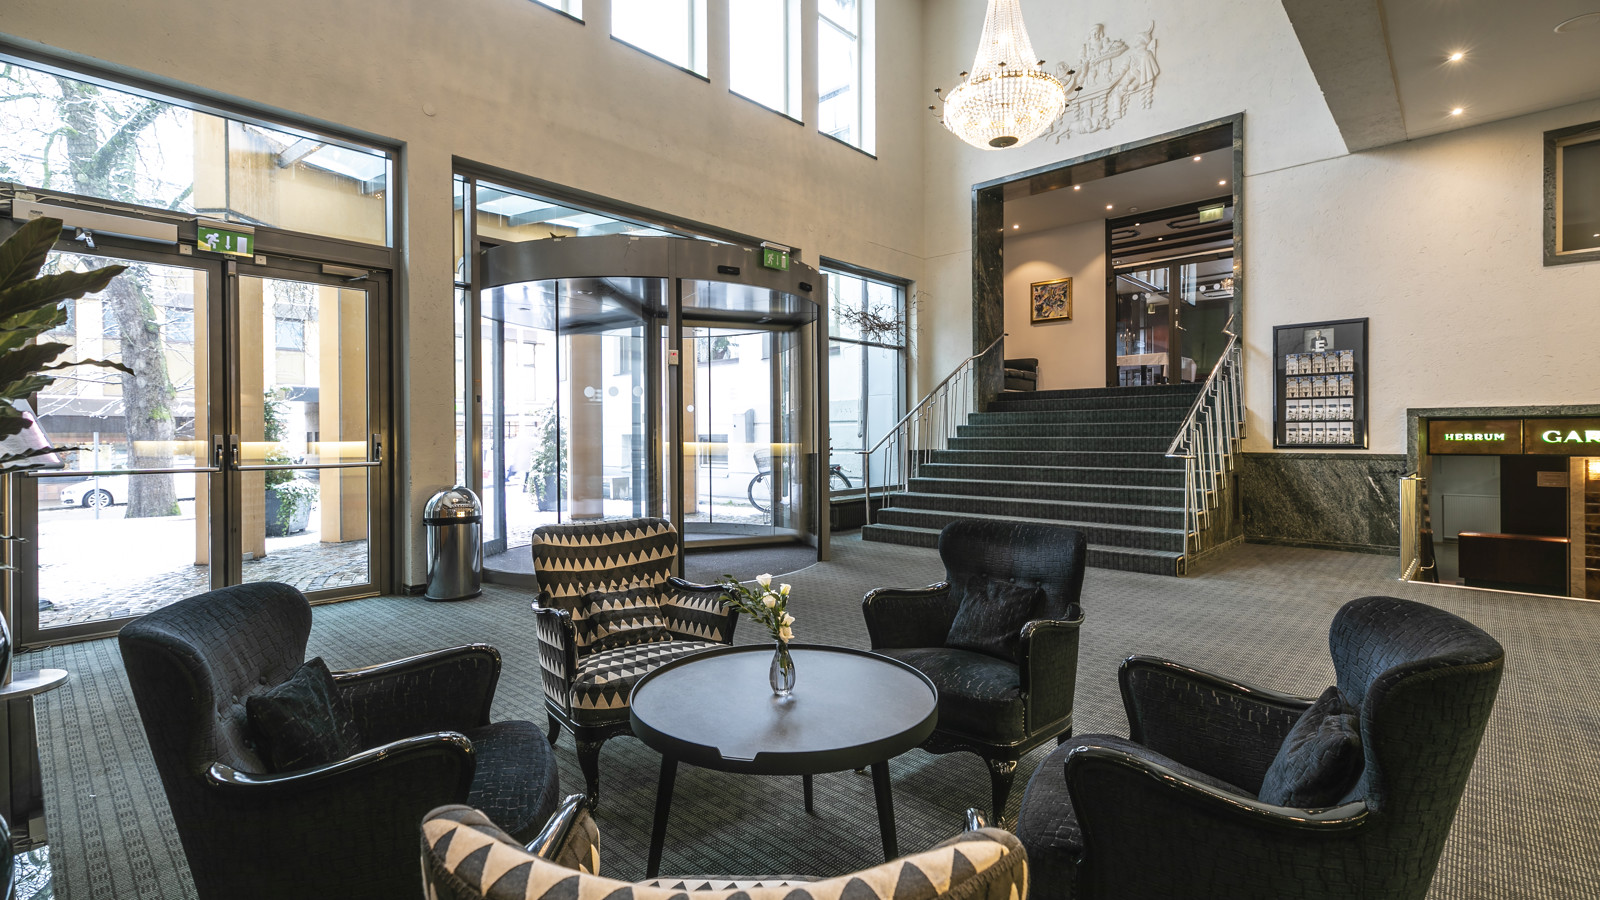 Hotel lobby with armchairs, large glass windows and stairs